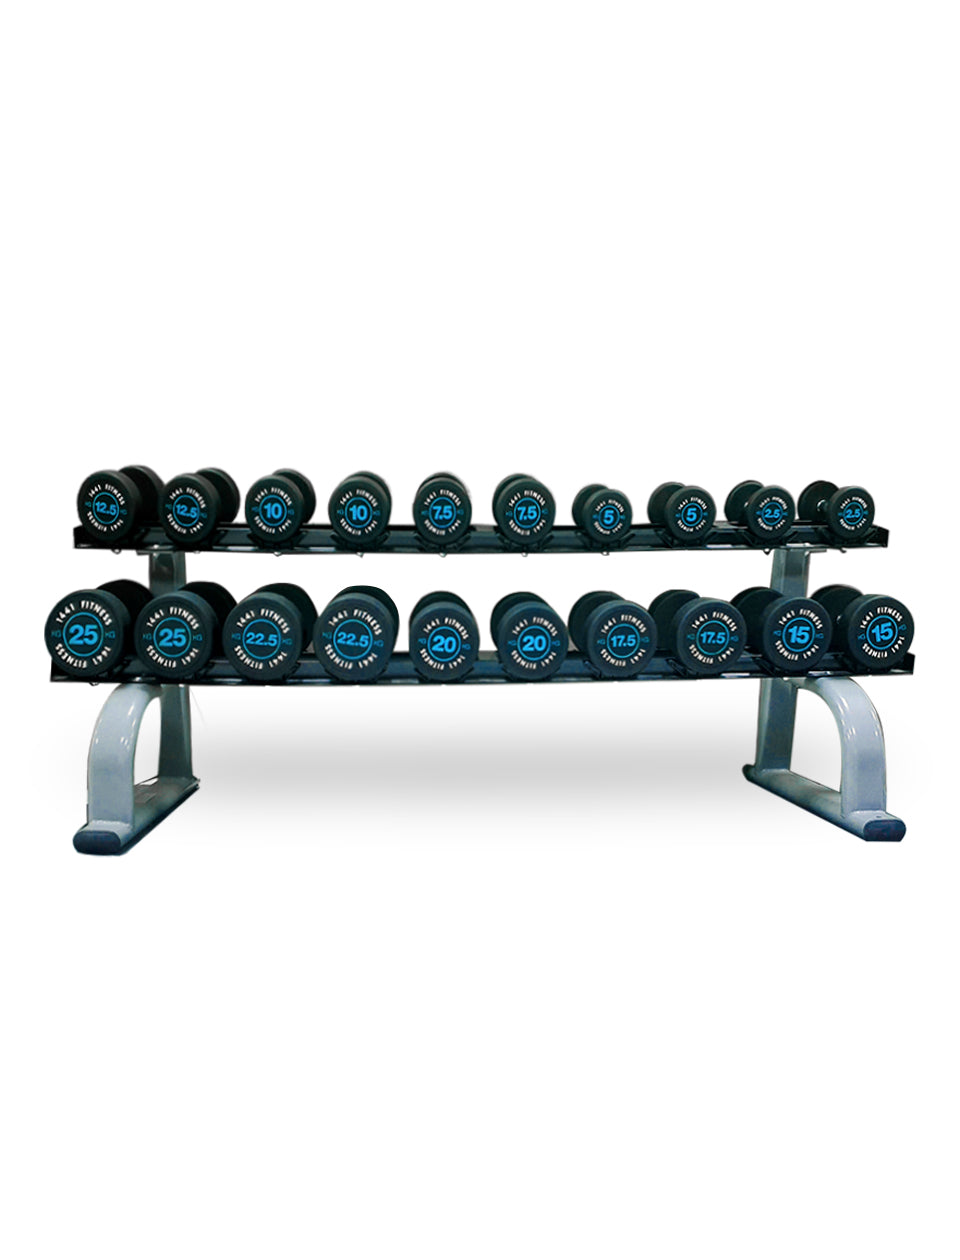 1441 Fitness Round Dumbbell Set 2.5 Kg to 25 Kg (10 Pairs) with 2 Tier Rack